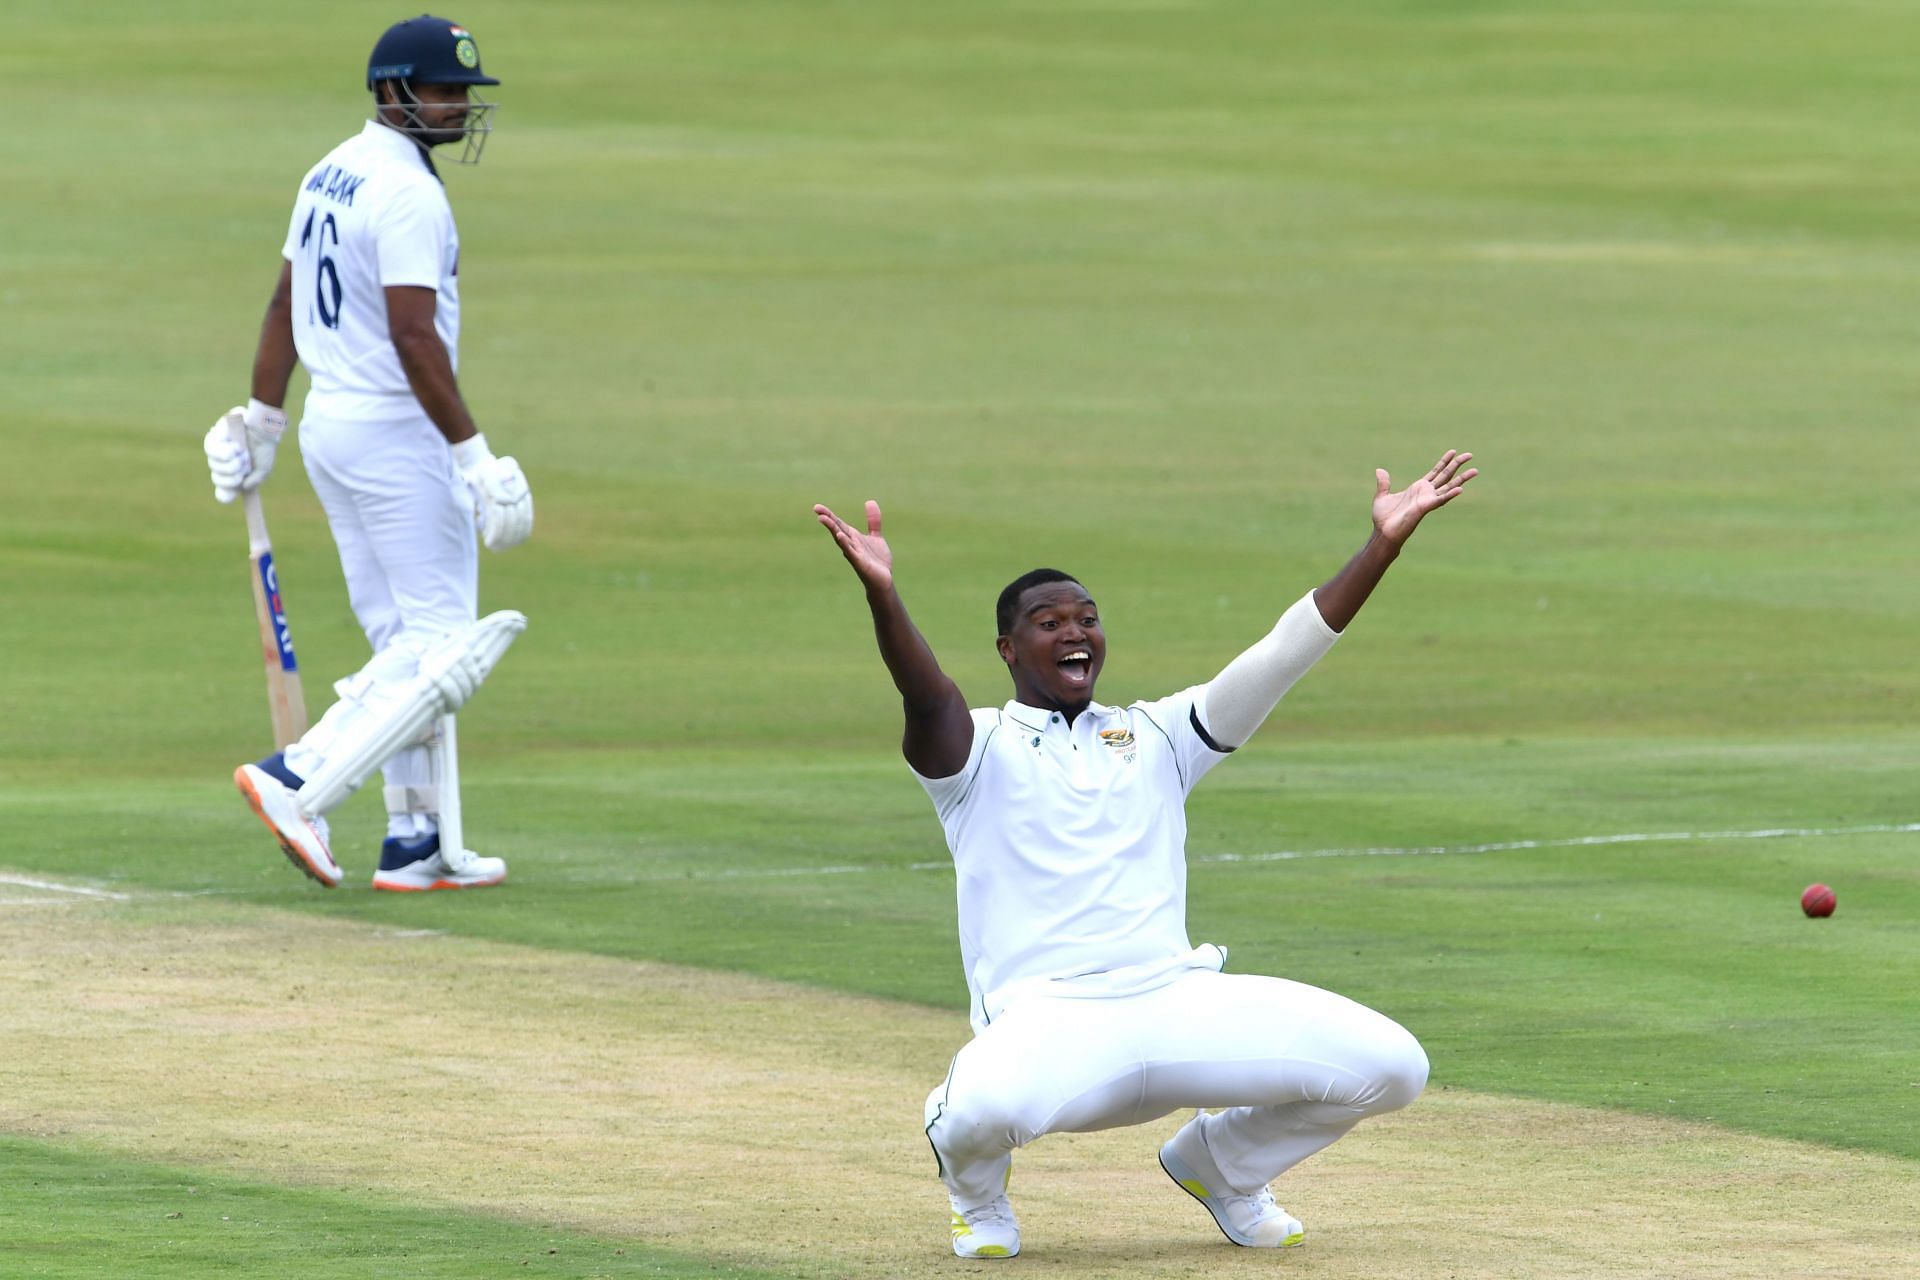 Lungi Ngidi will be crucial with the new ball for South Africa